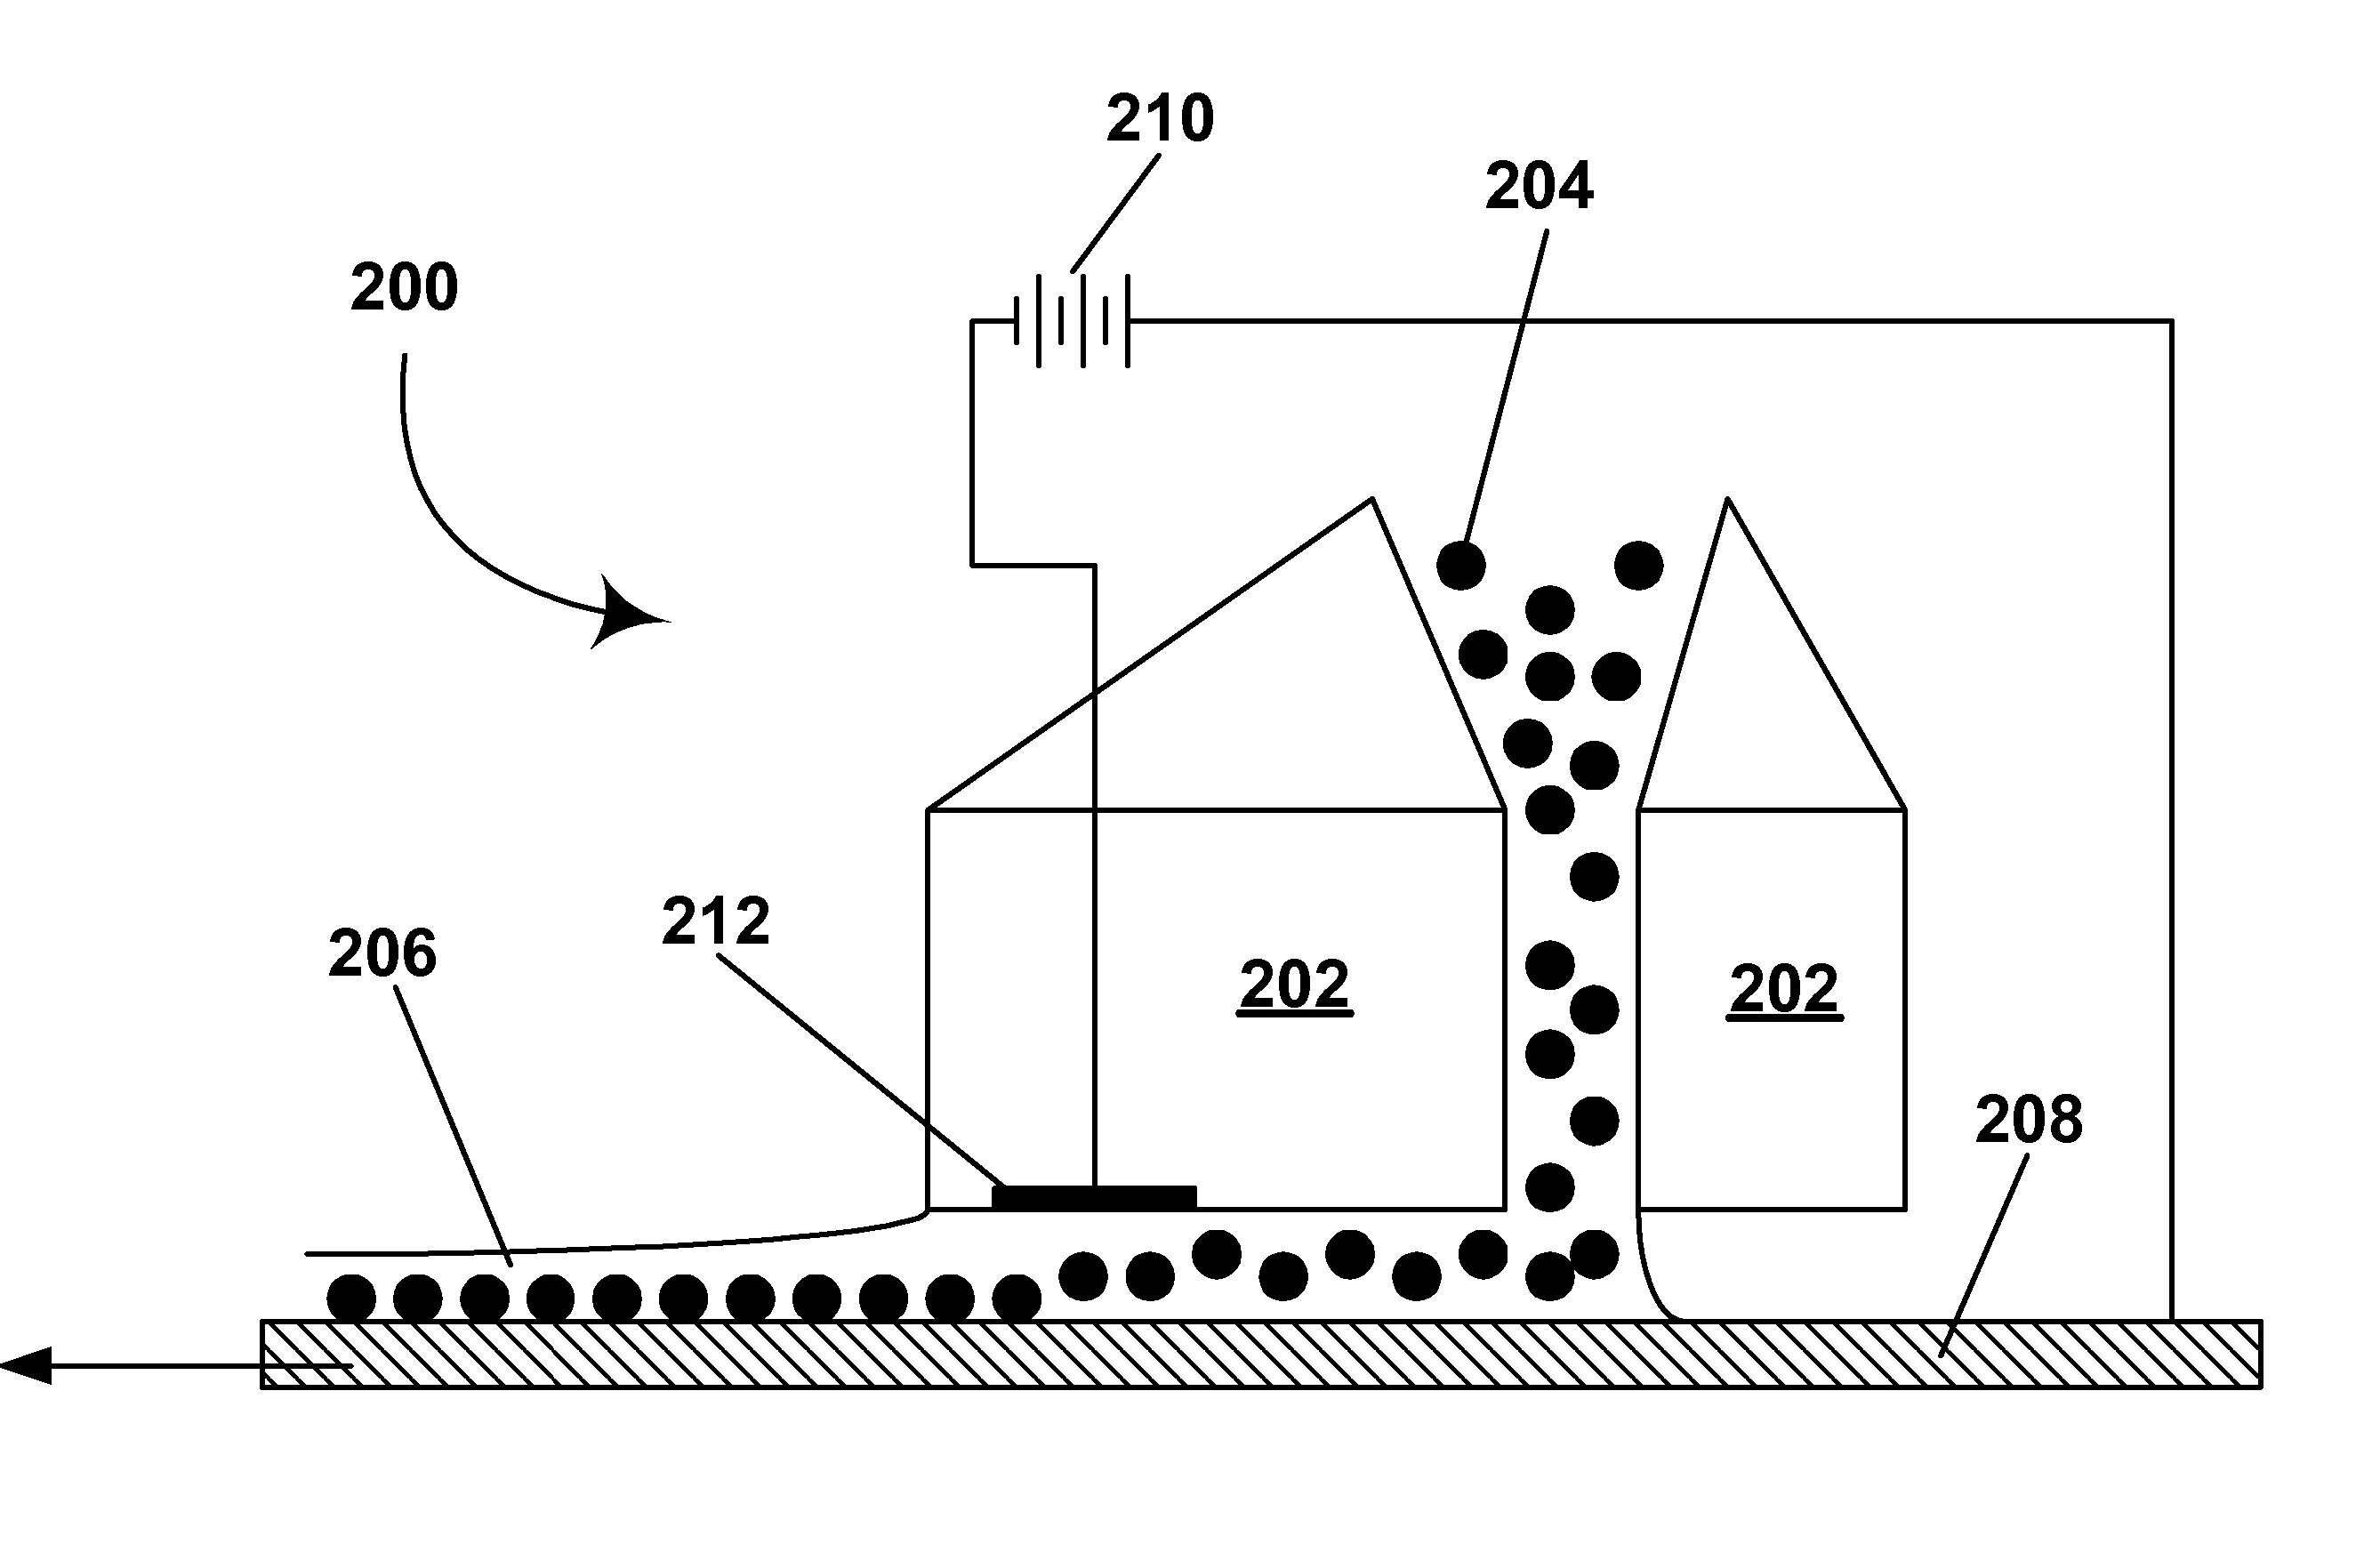 Processes for the production of electrophoretic displays